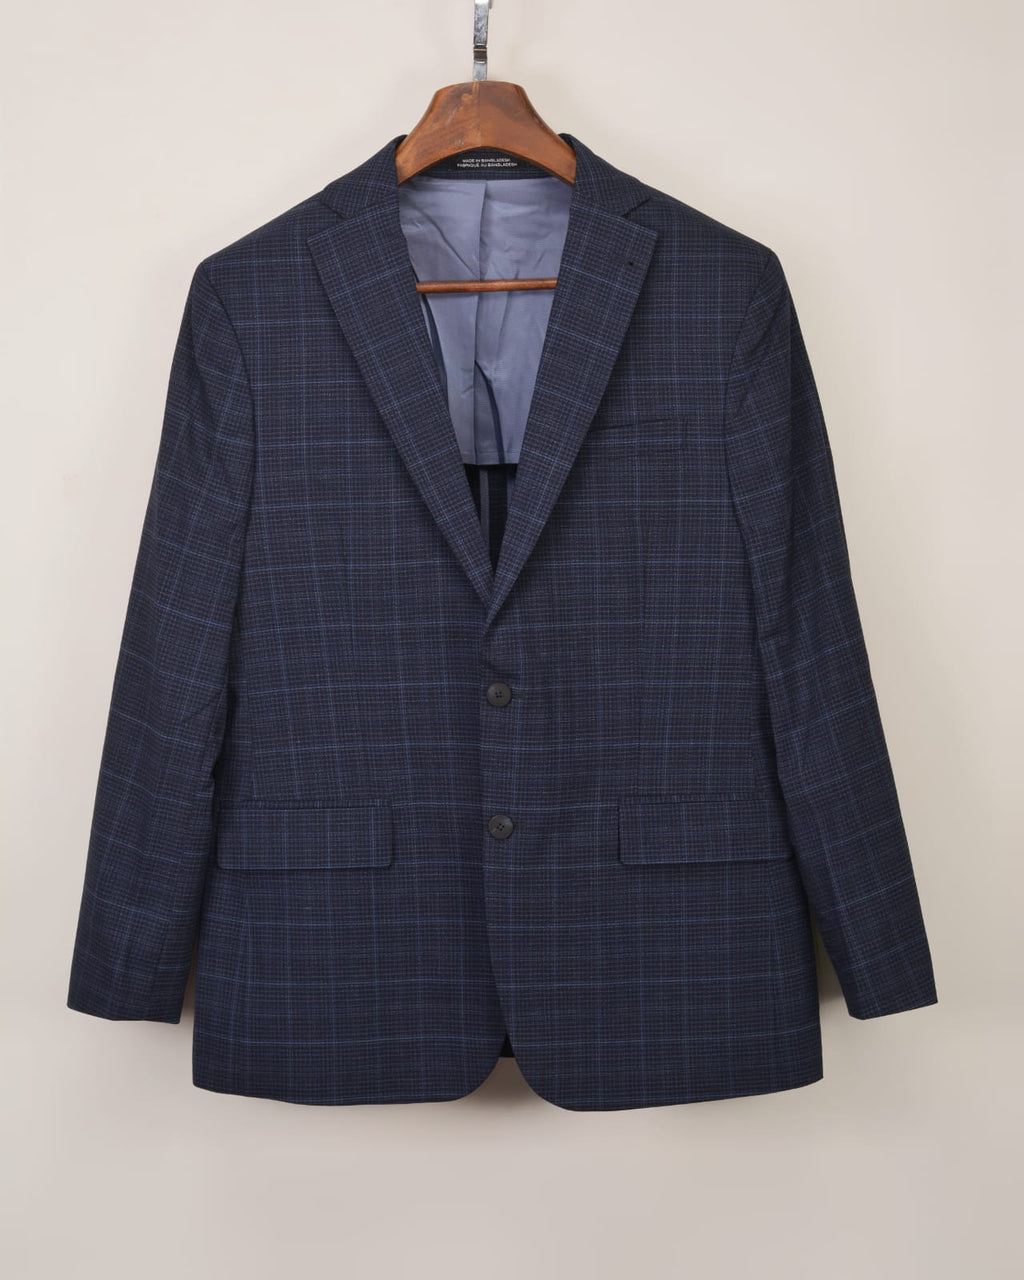 Awearness Kenneth Cole Modern Fit Sport Coat, Navy Plaid